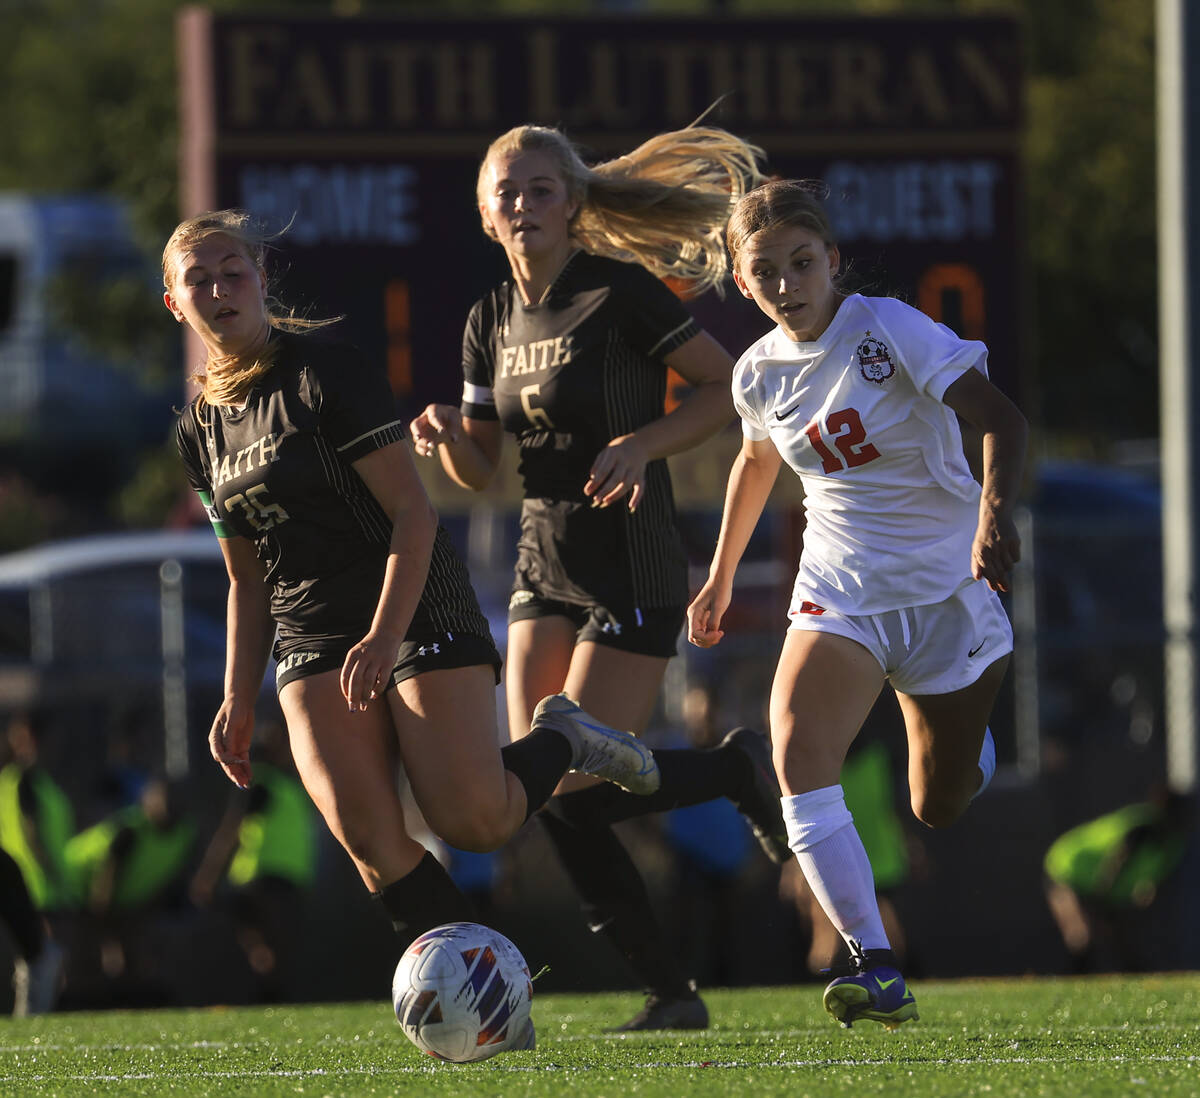 Faith Lutheran's Taylor Folk (26) and an unidentified player chase after the ball against Coron ...